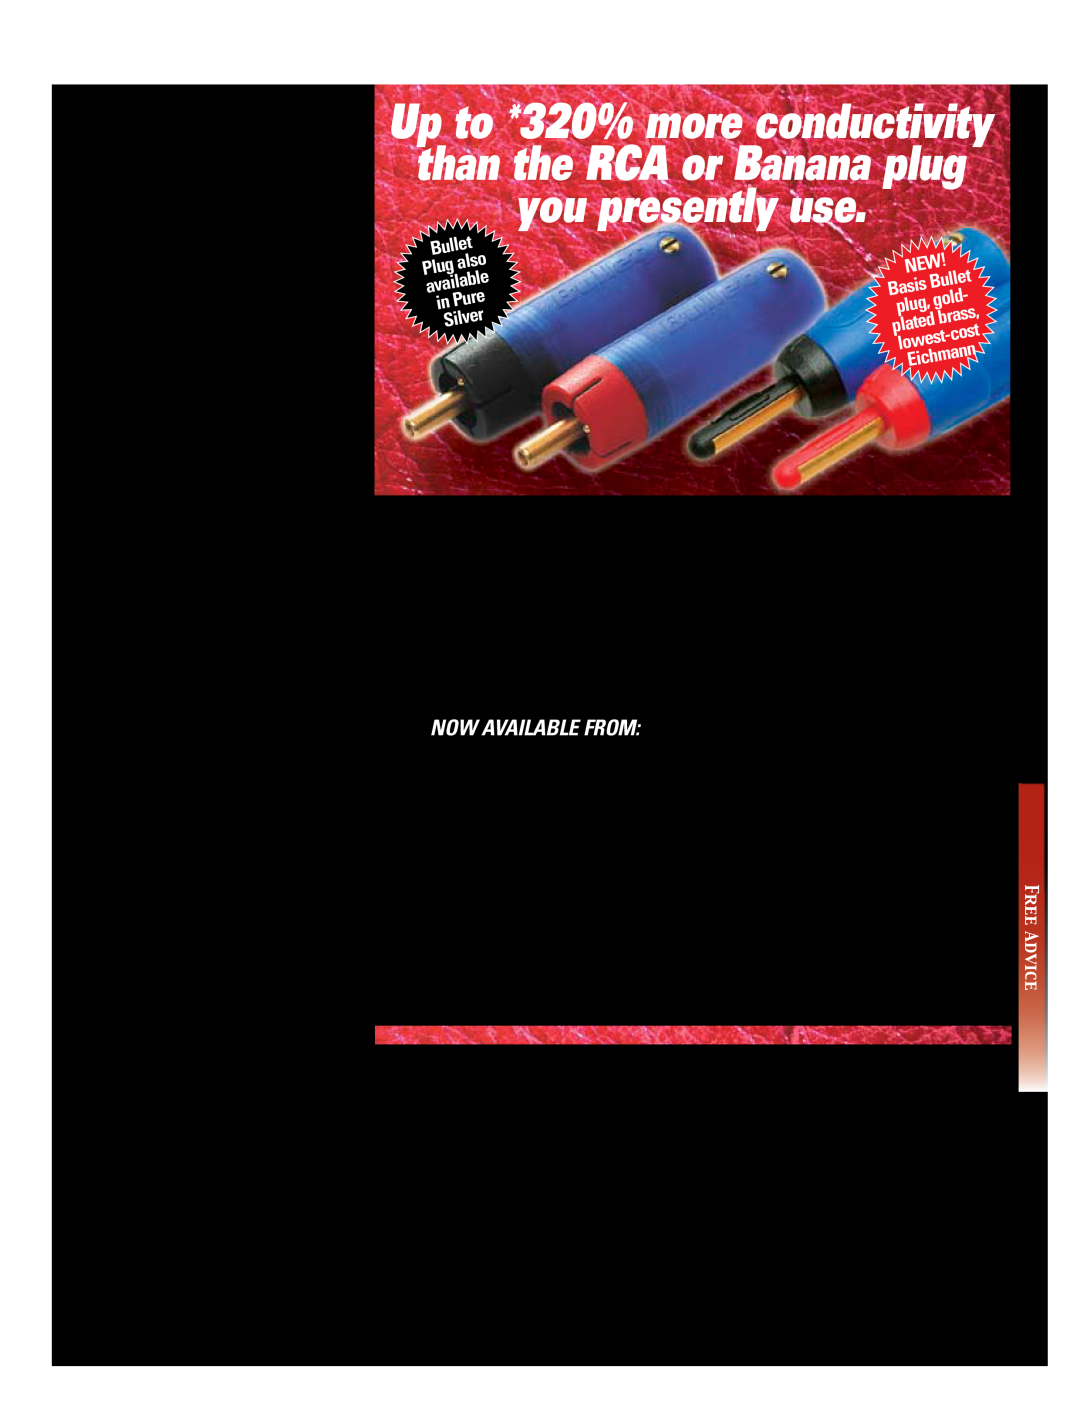 Koss 76 manual reviews, Now available from, Bullet, also, Plug, Pure, Silver, Basis, cost, lowest 